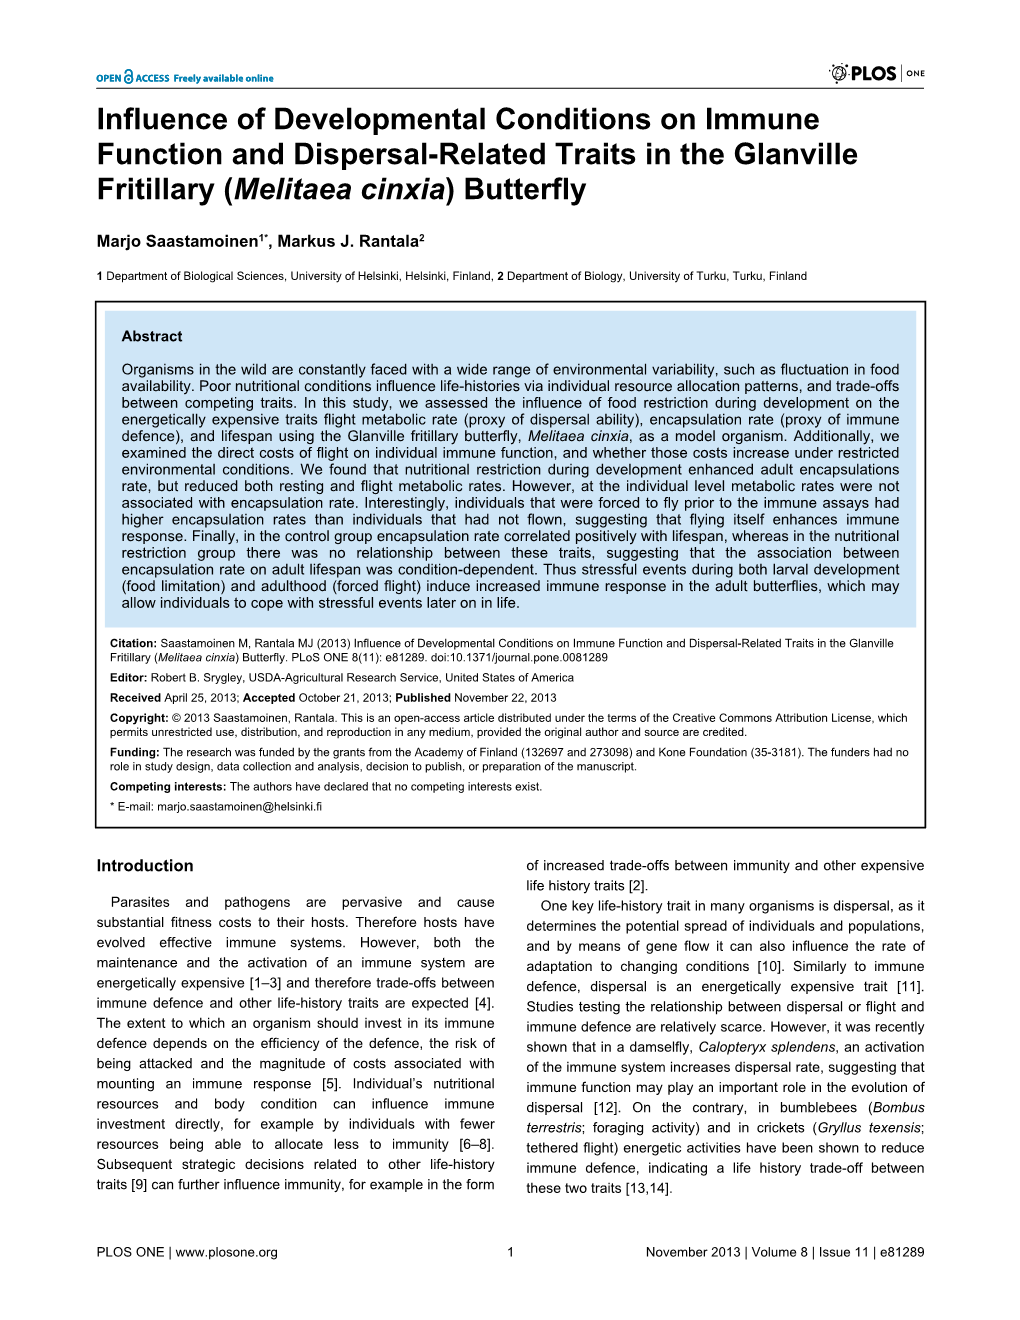 Influence of Developmental Conditions on Immune Function and Dispersal-Related Traits in the Glanville Fritillary (Melitaea Cinxia) Butterfly